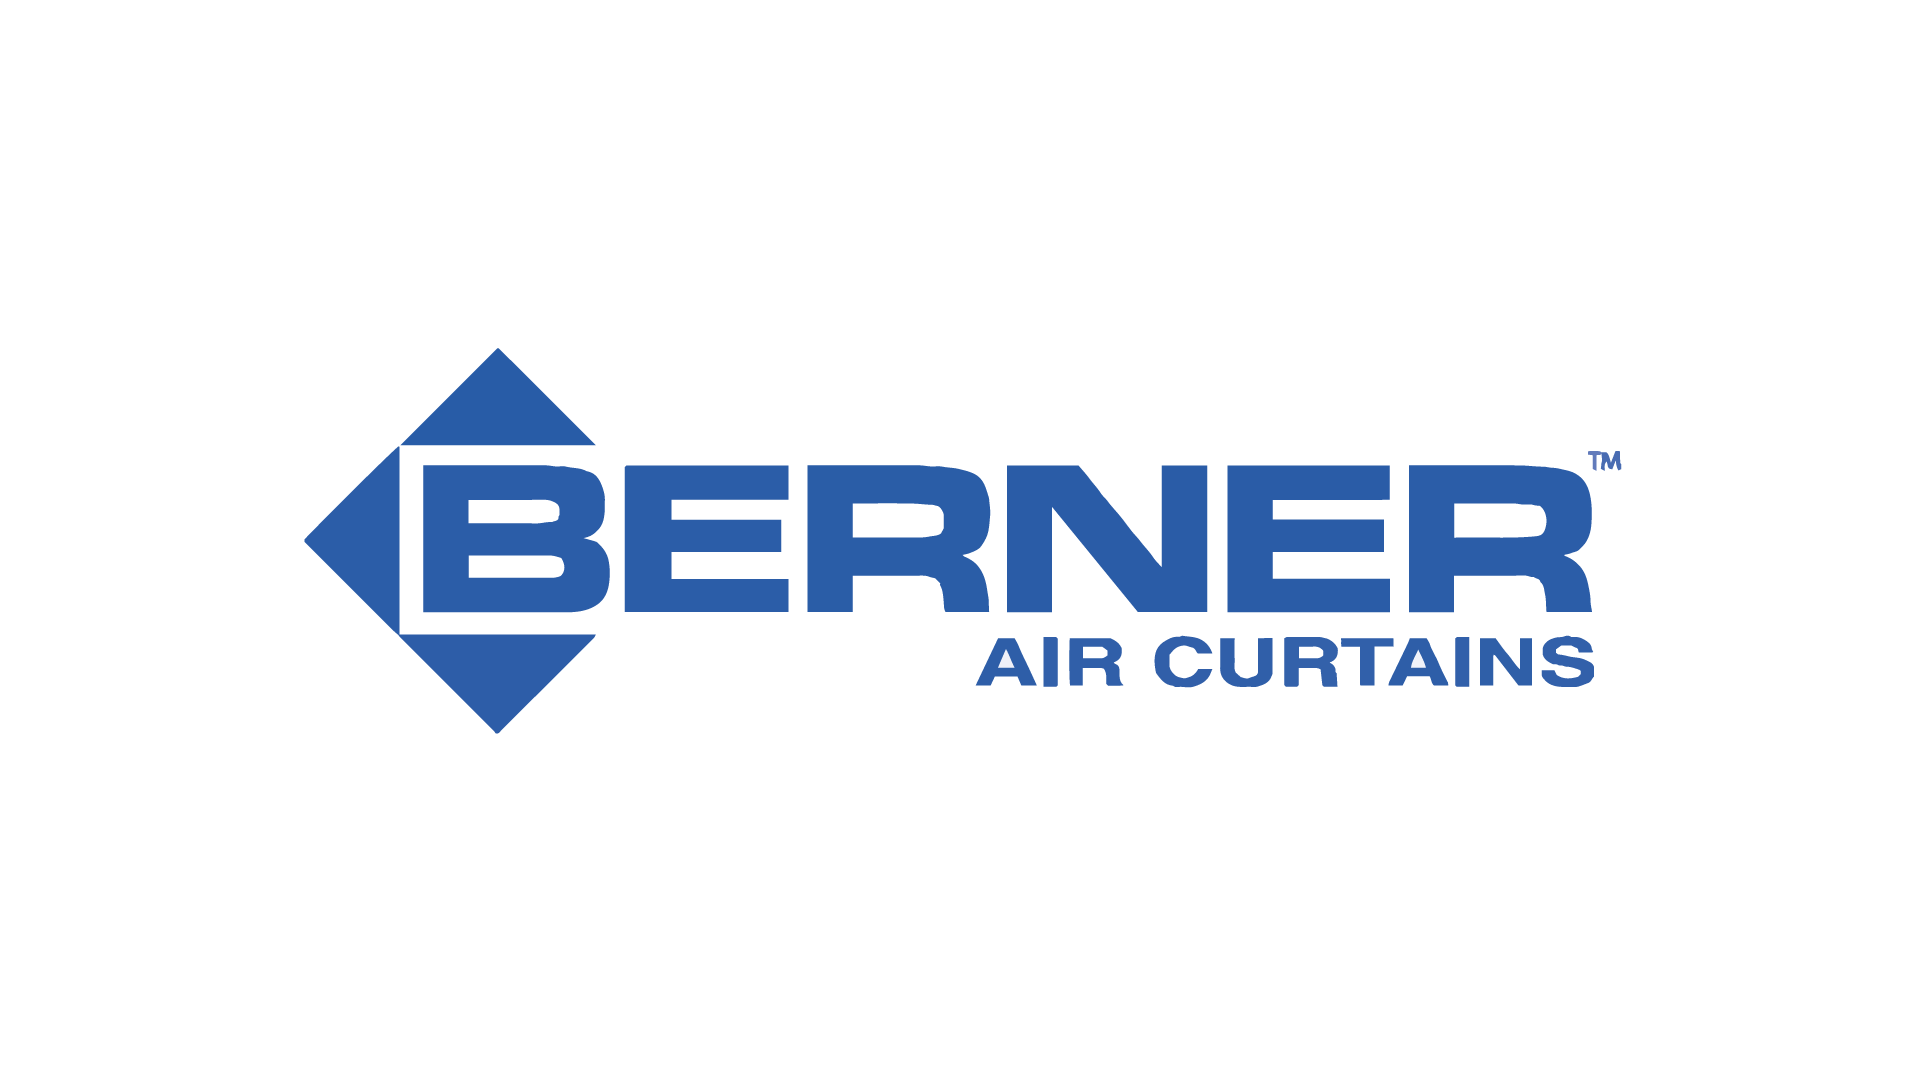 Berner Air Curtain works with CADS